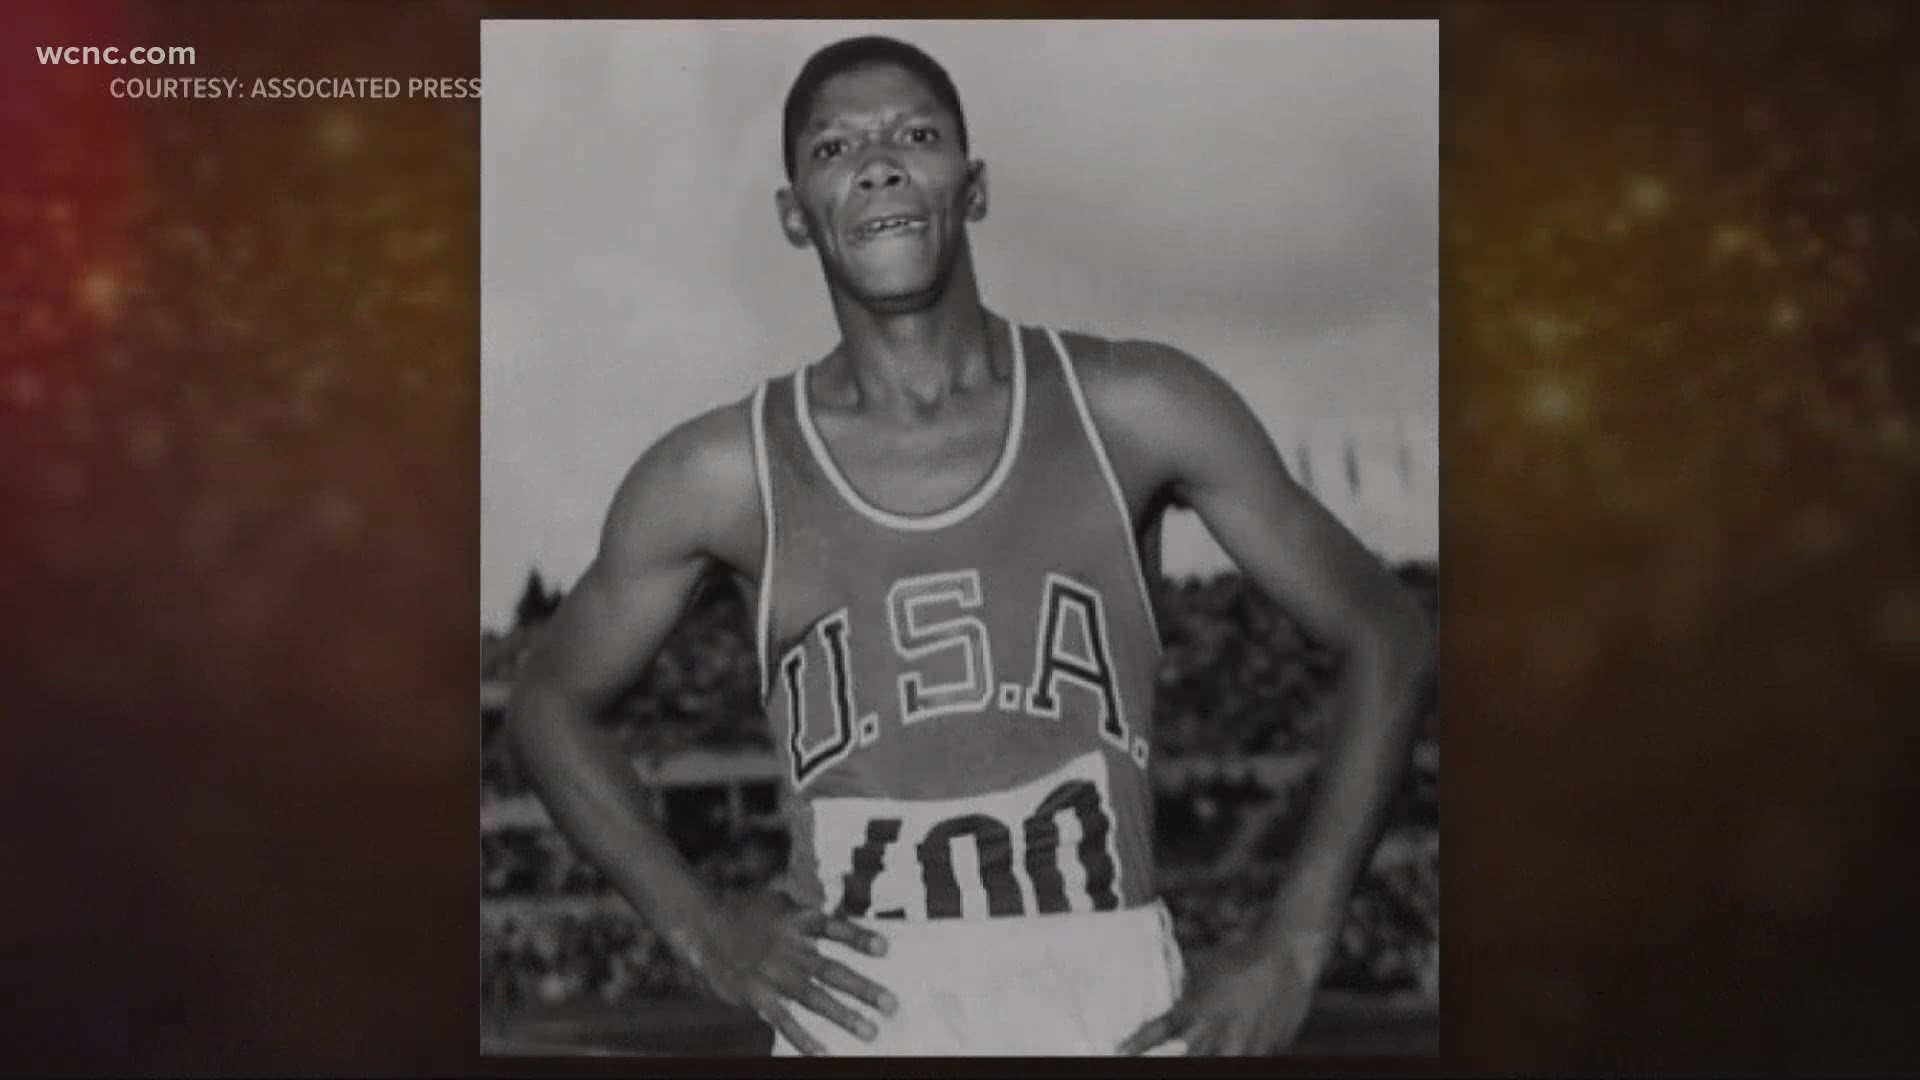 Sacrifice and perseverance -- that's what Otis Davis' journey to the 1960 Olympics is all about.